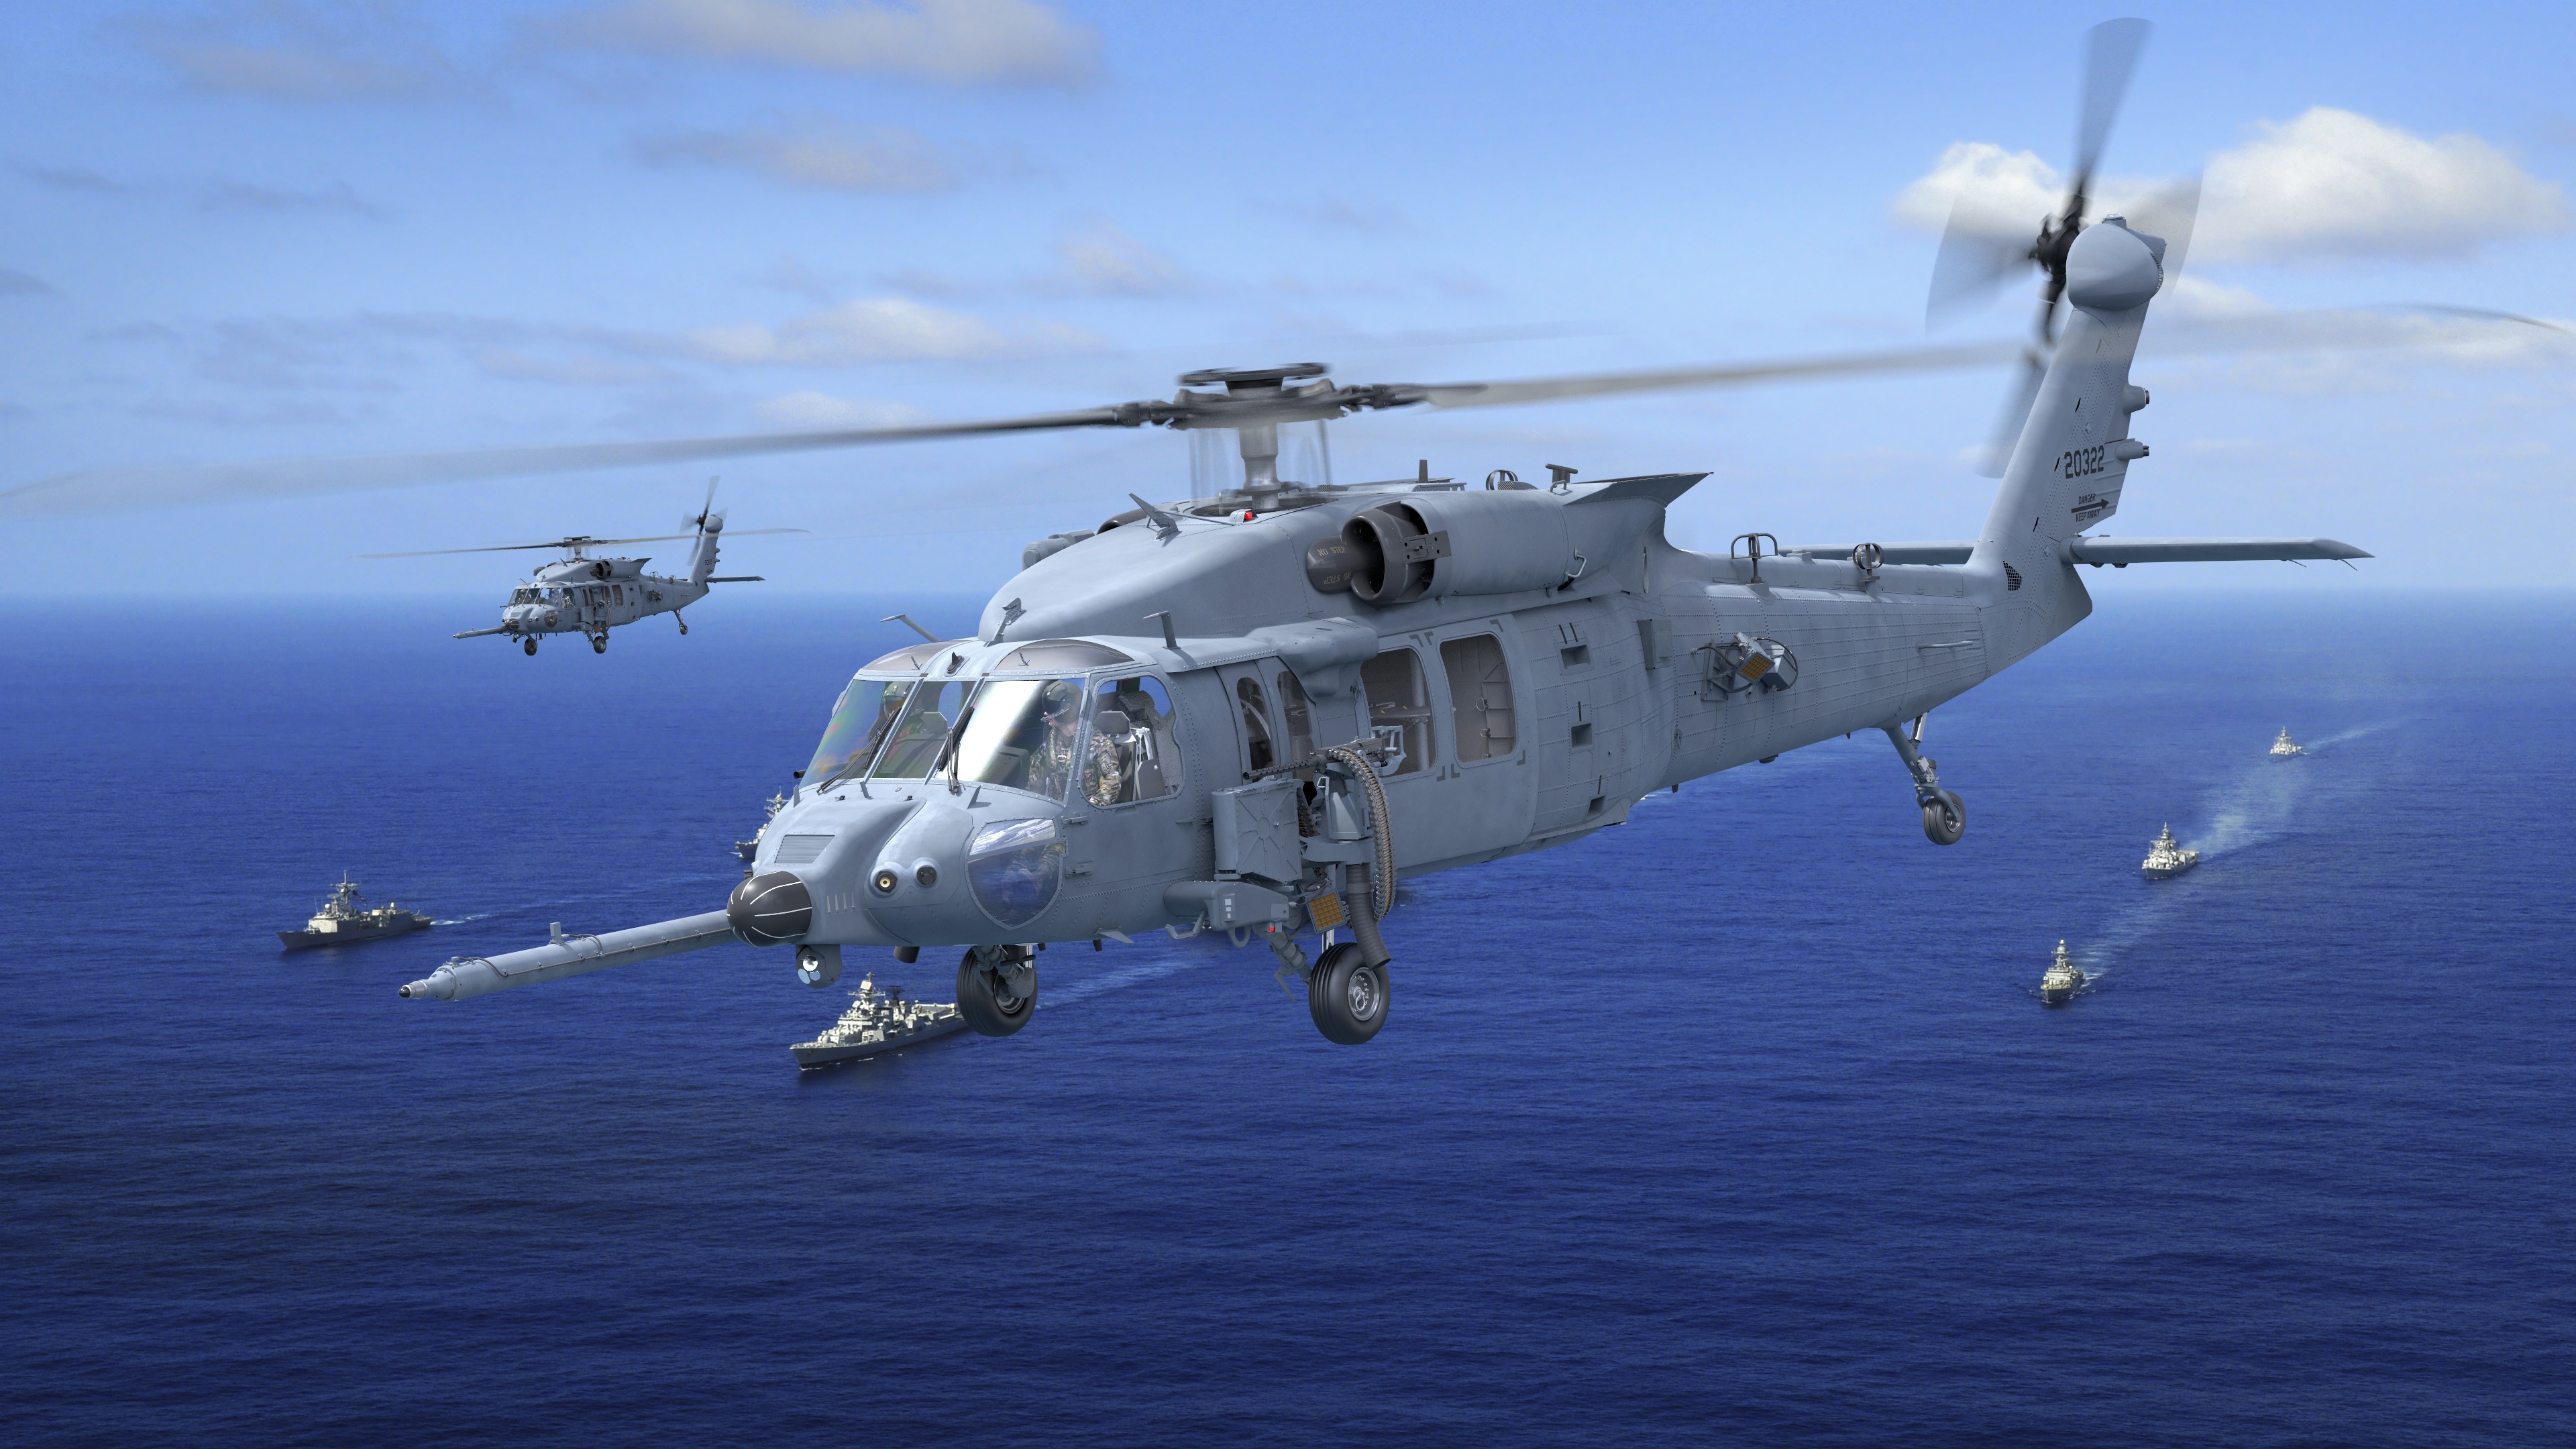 Sikorsky HH-60 Pave Hawk, Rescue helicopter, High resolution, Wallpaper collection, 3840x2160 4K Desktop